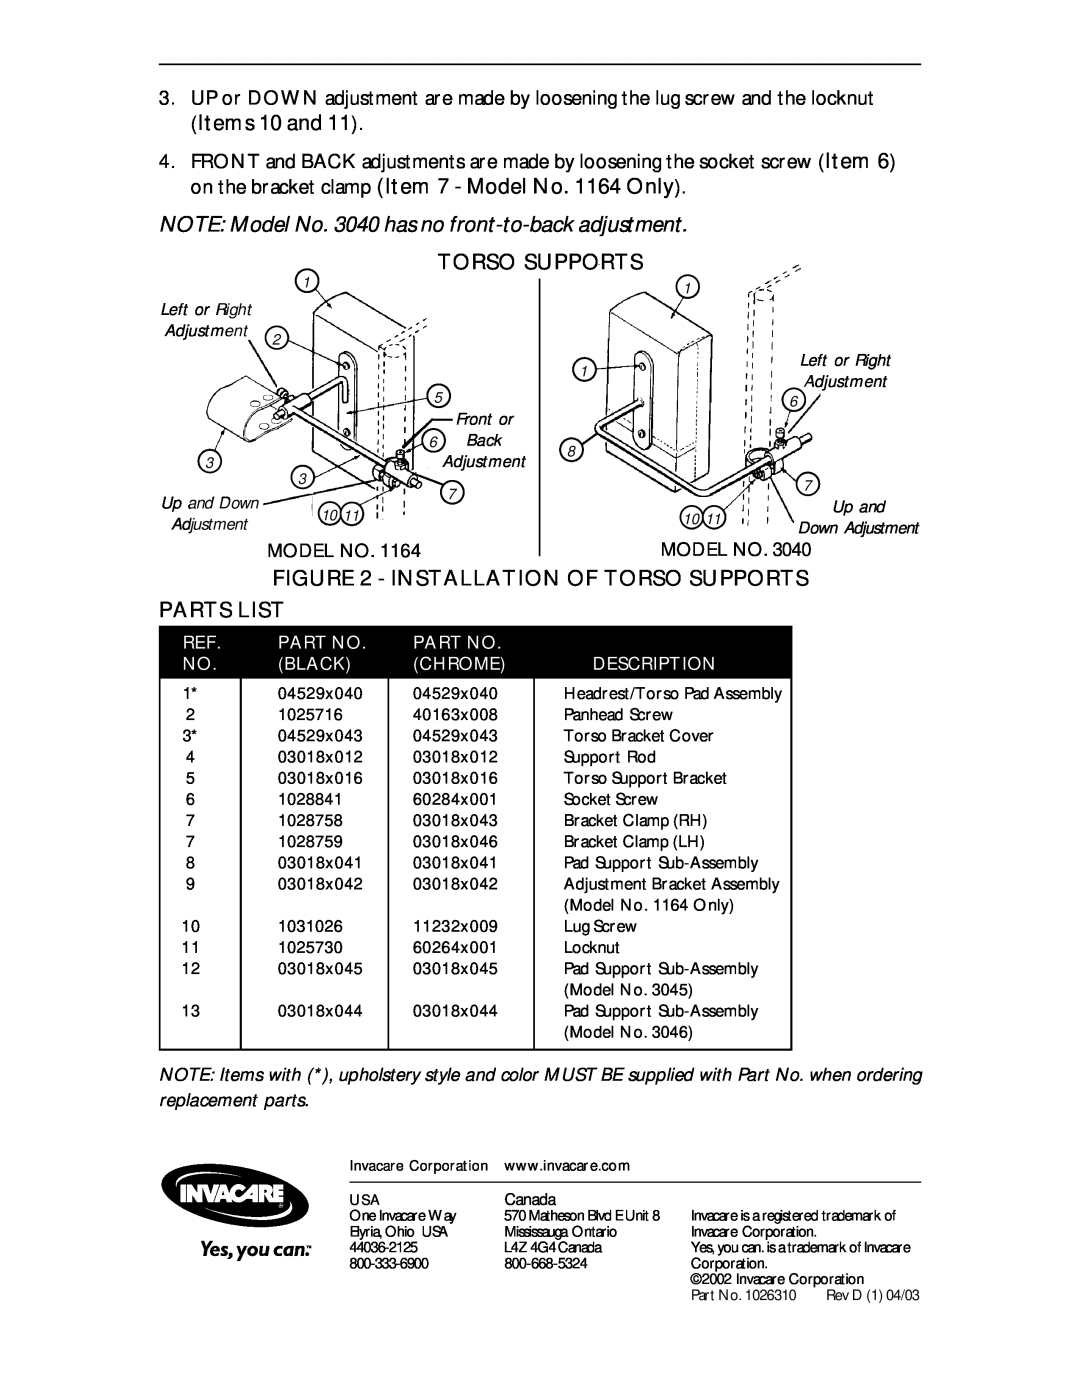 Invacare 1164, 3046, 3045, 3040 operating instructions Installation Of Torso Supports, Parts List 